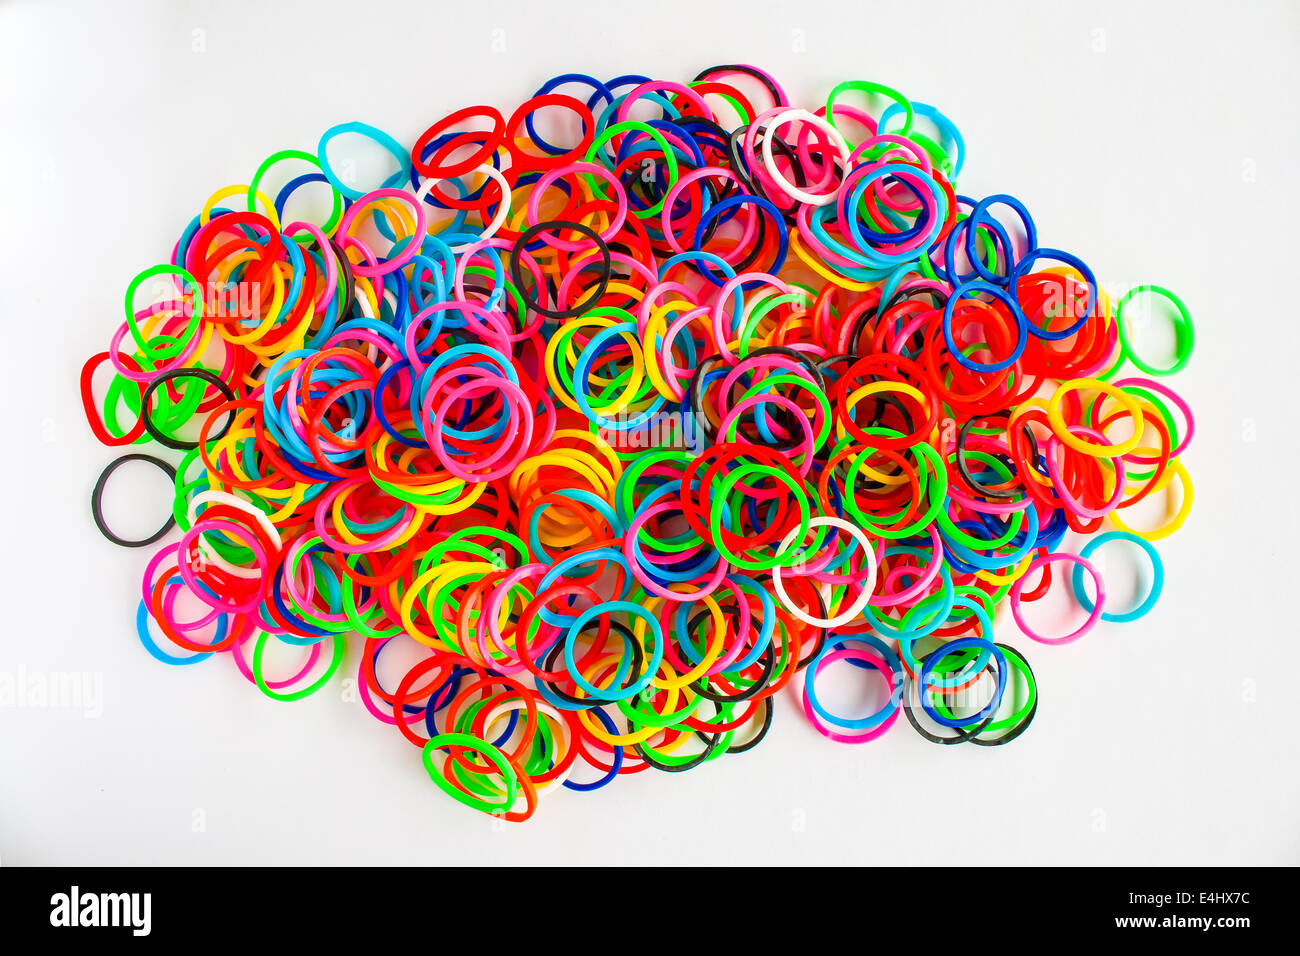 Premium Photo  Pile of small round colorful rubber bands for making  rainbow loom bracelets isolated on dark background